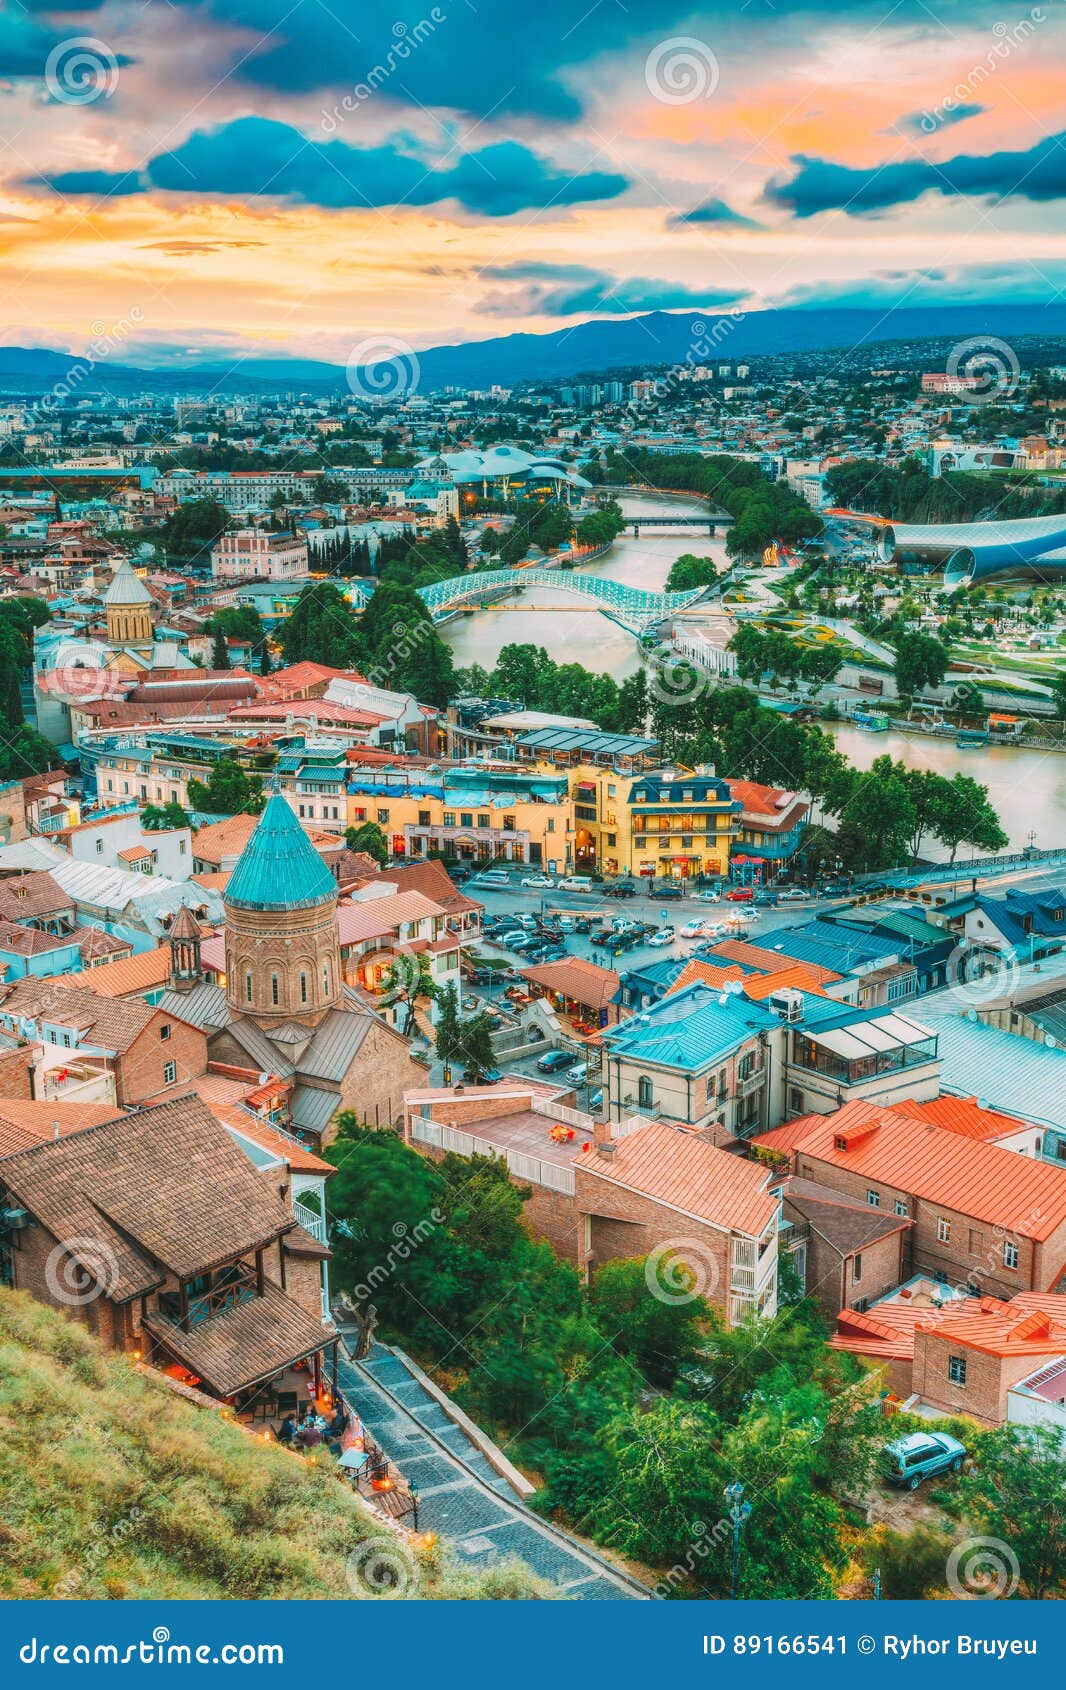 Wallpaper Georgia, backlight, architecture, panorama, the city, lights,  capital, night, lights, Tbilisi, building images for desktop, section город  - download